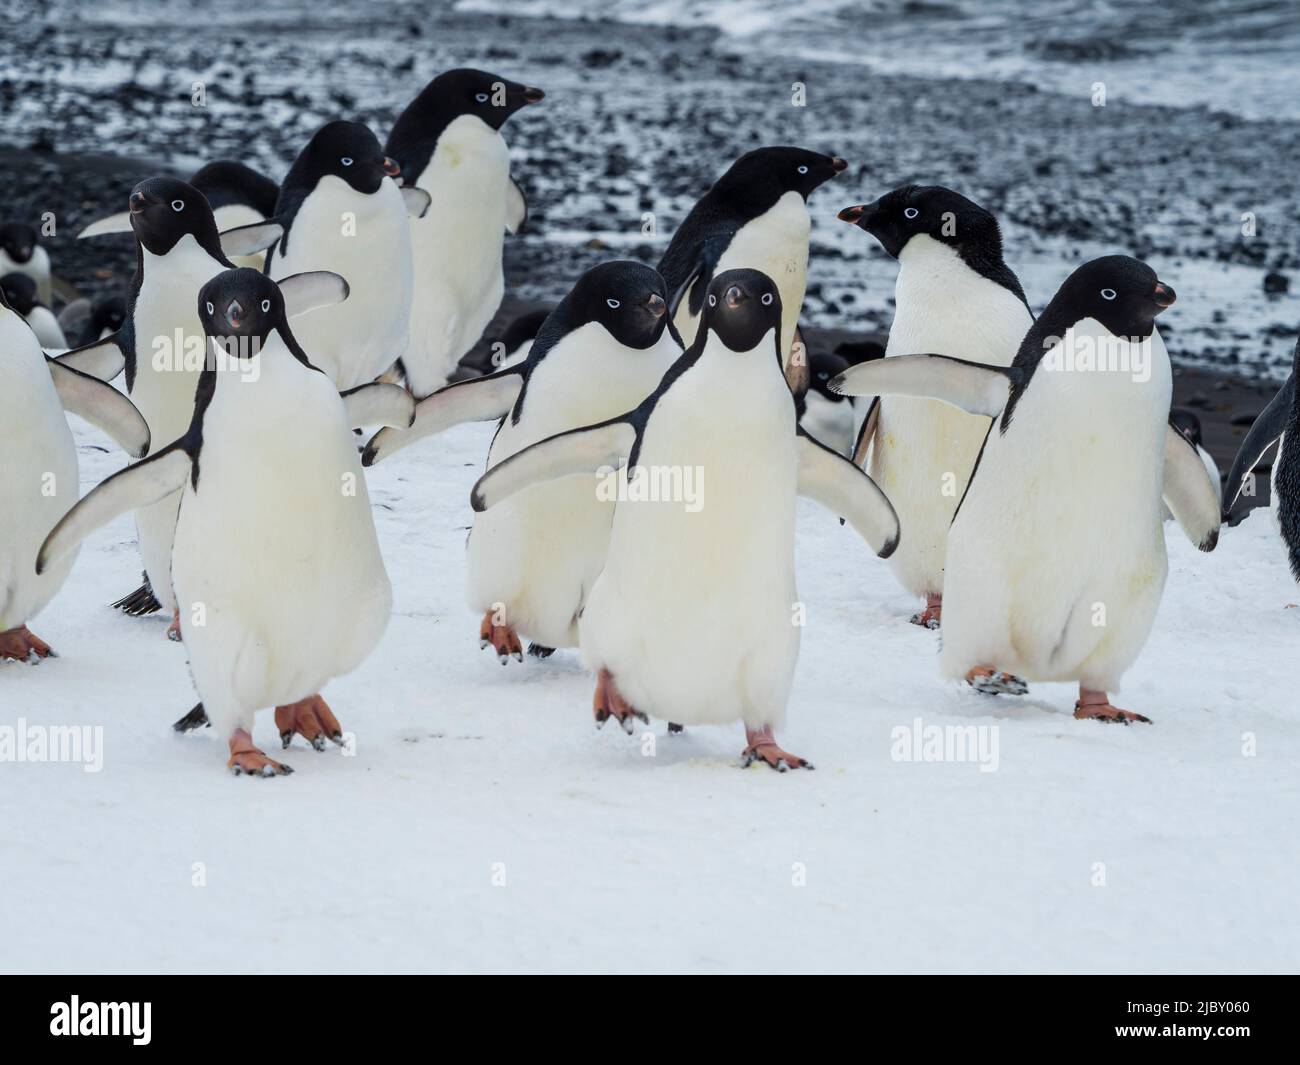 March of the Penguins, Adelie penguins (Pygoscelis adeliae) at Brown Bluff, Antarctic Peninsula Stock Photo